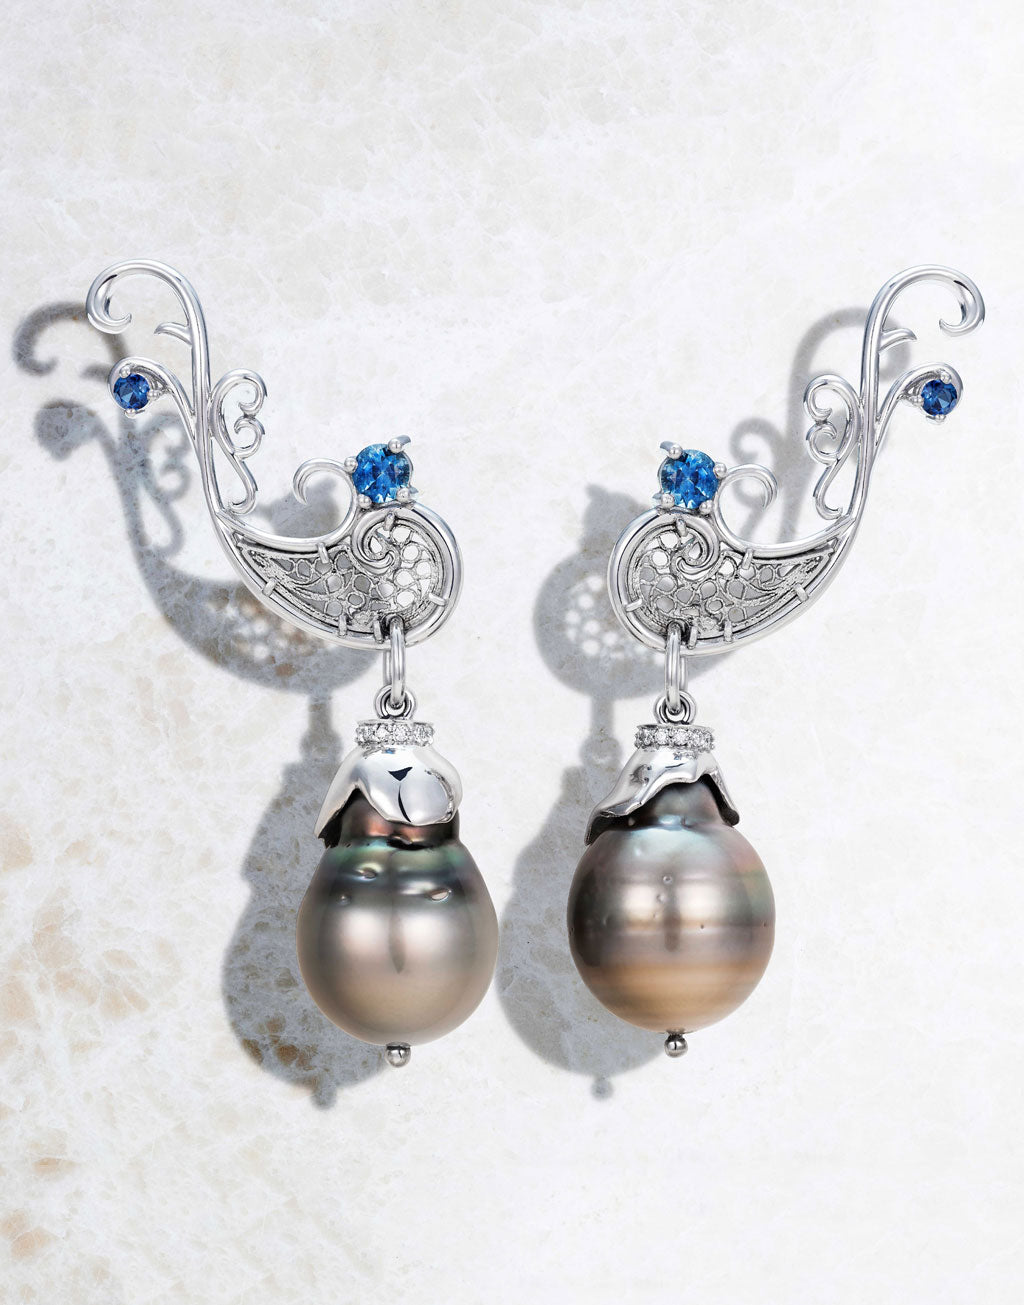 Highly hand-crafted filigree drop earrings holding sustainably harvested black Tahitian pearls and fair-traded tanzanite